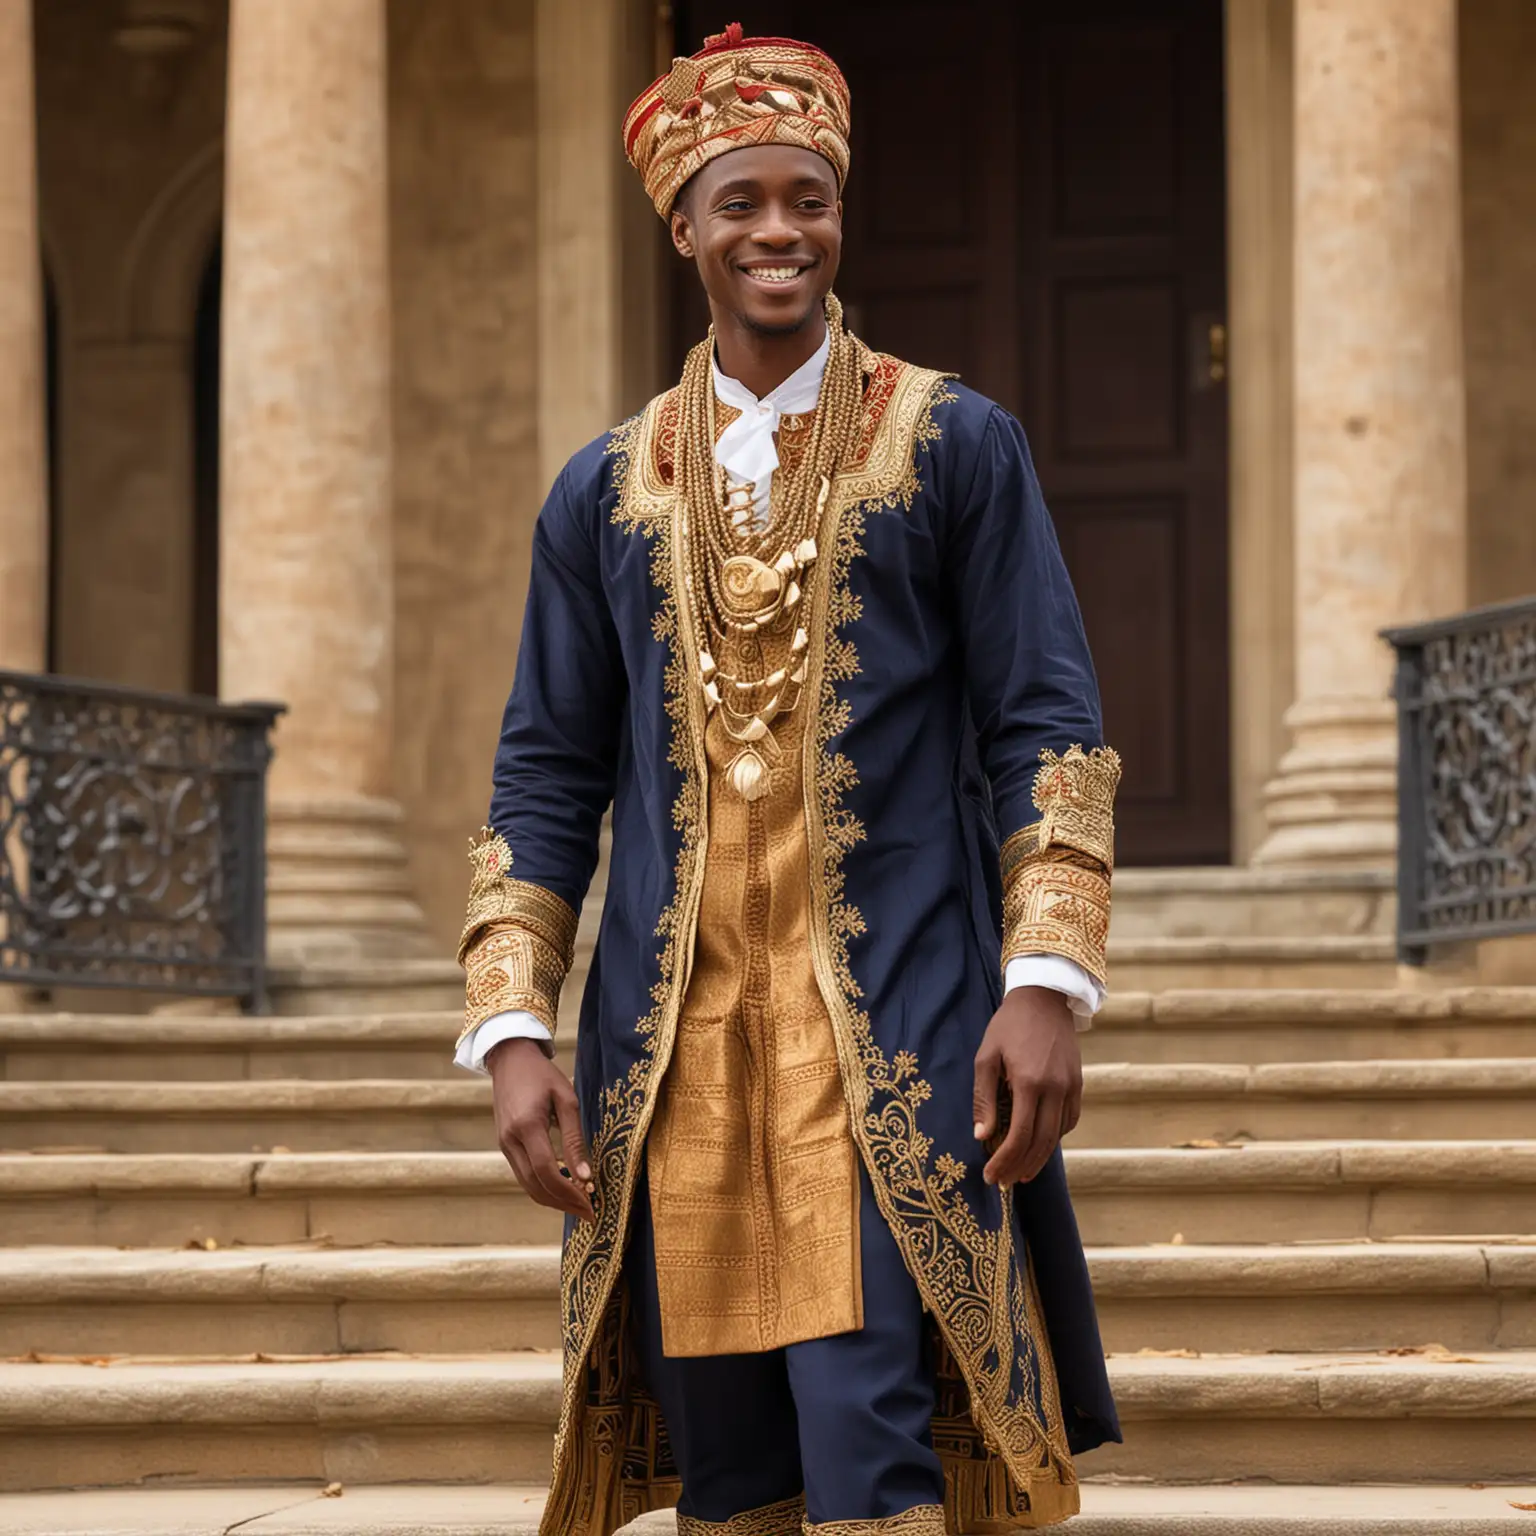 Smiling African Prince in Cultural Attire on Palace Steps